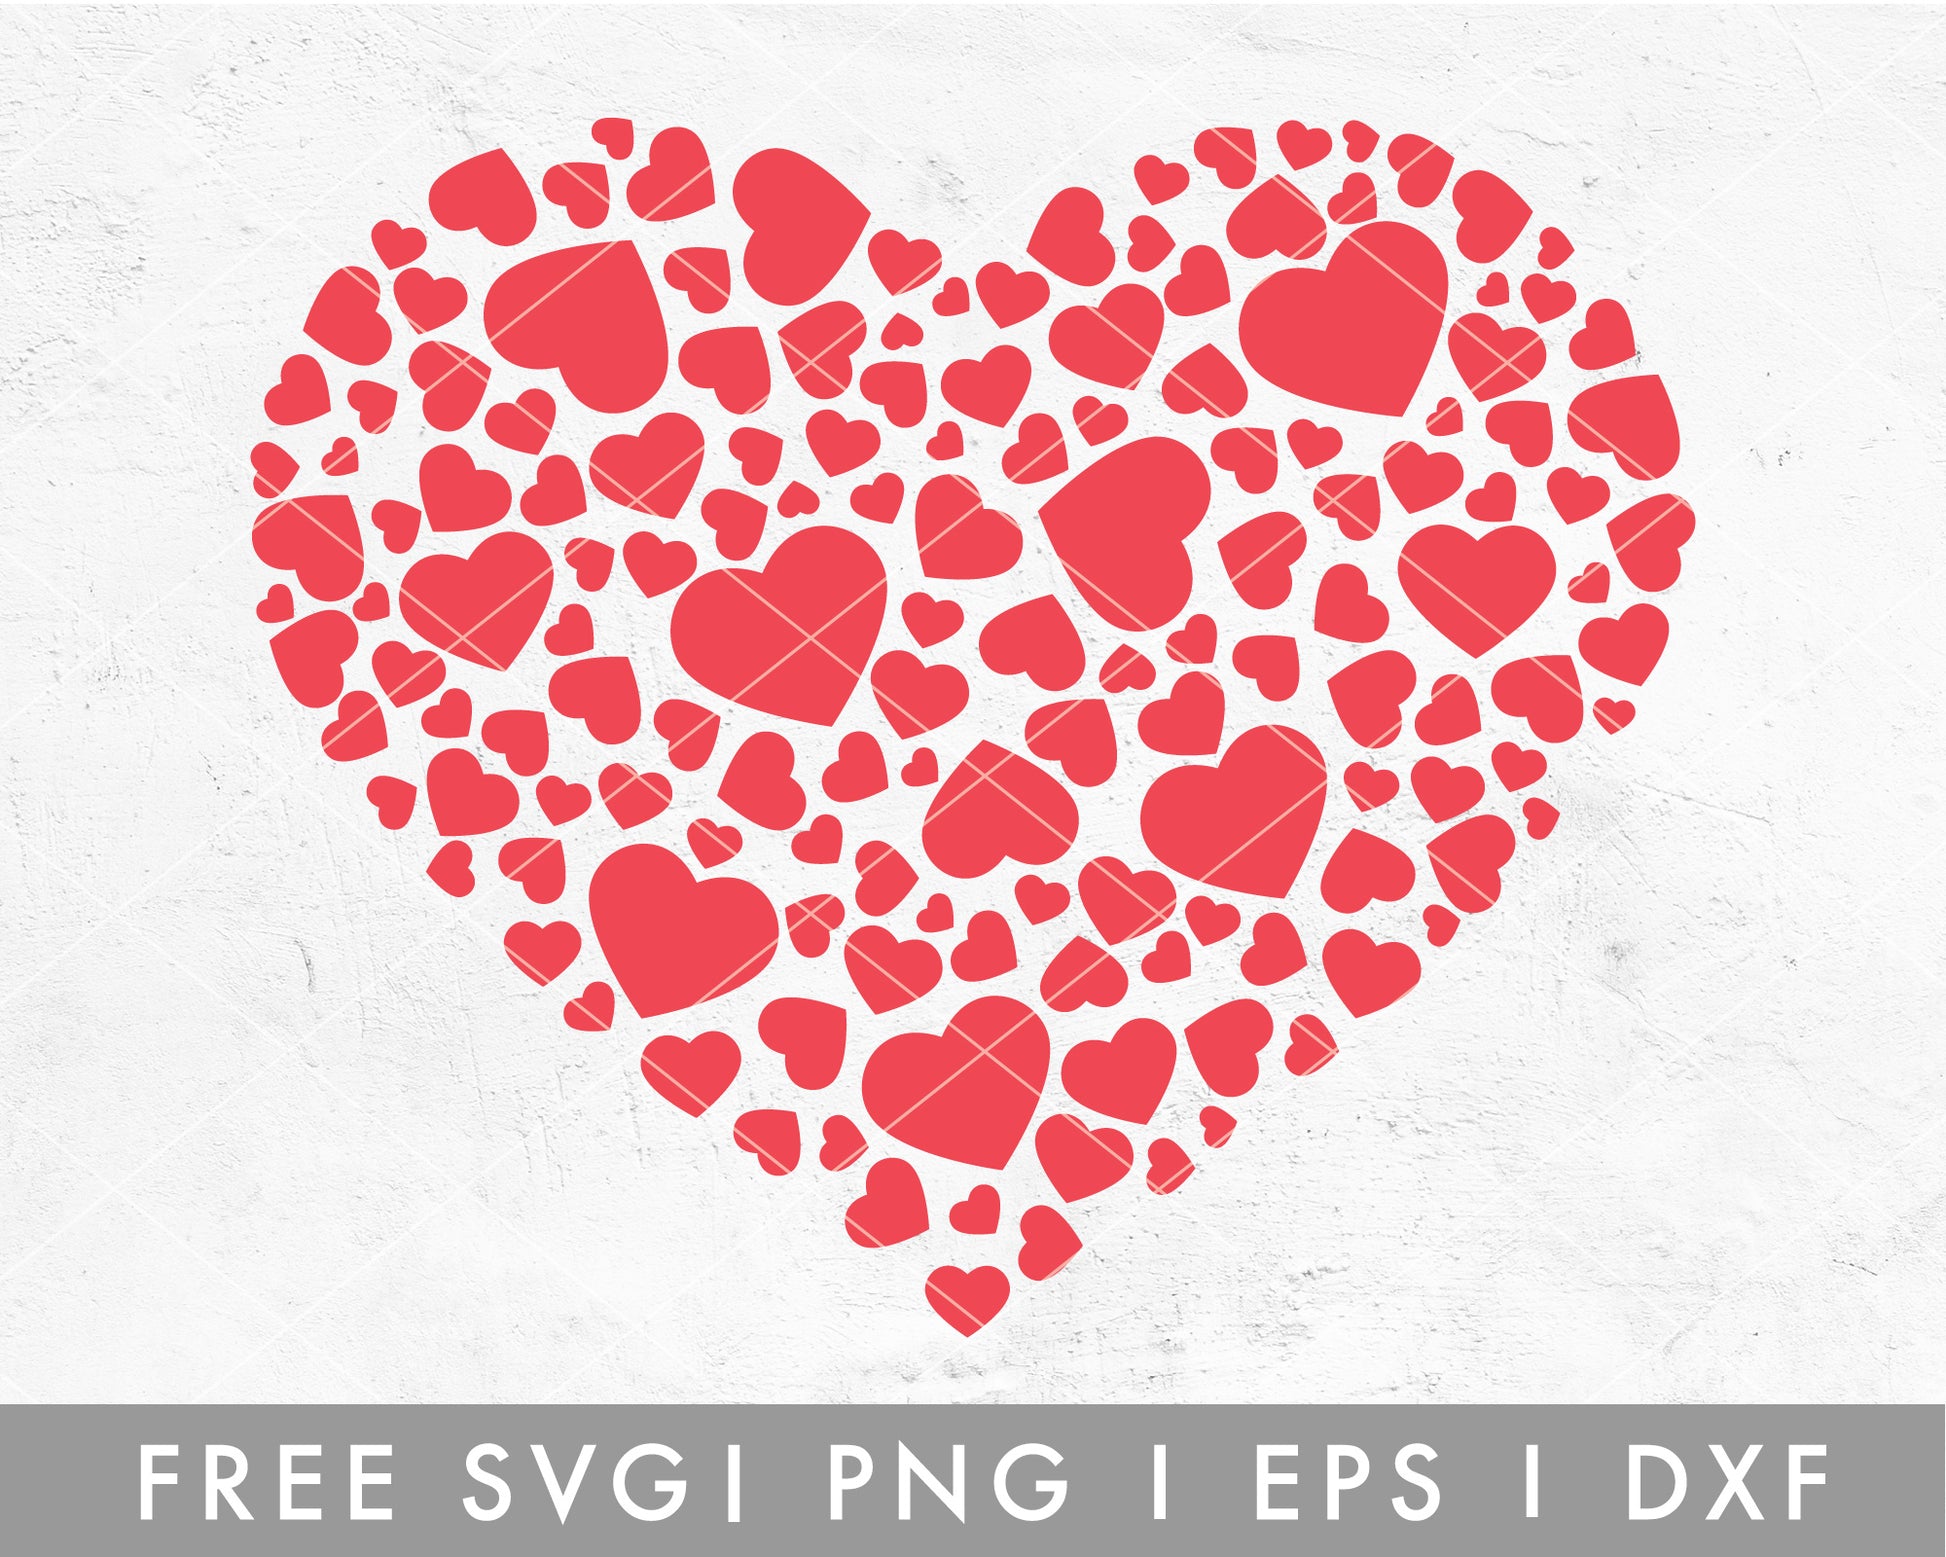 Free Little Red Hearts Clipart - Download in Illustrator, EPS, SVG, JPG,  PNG